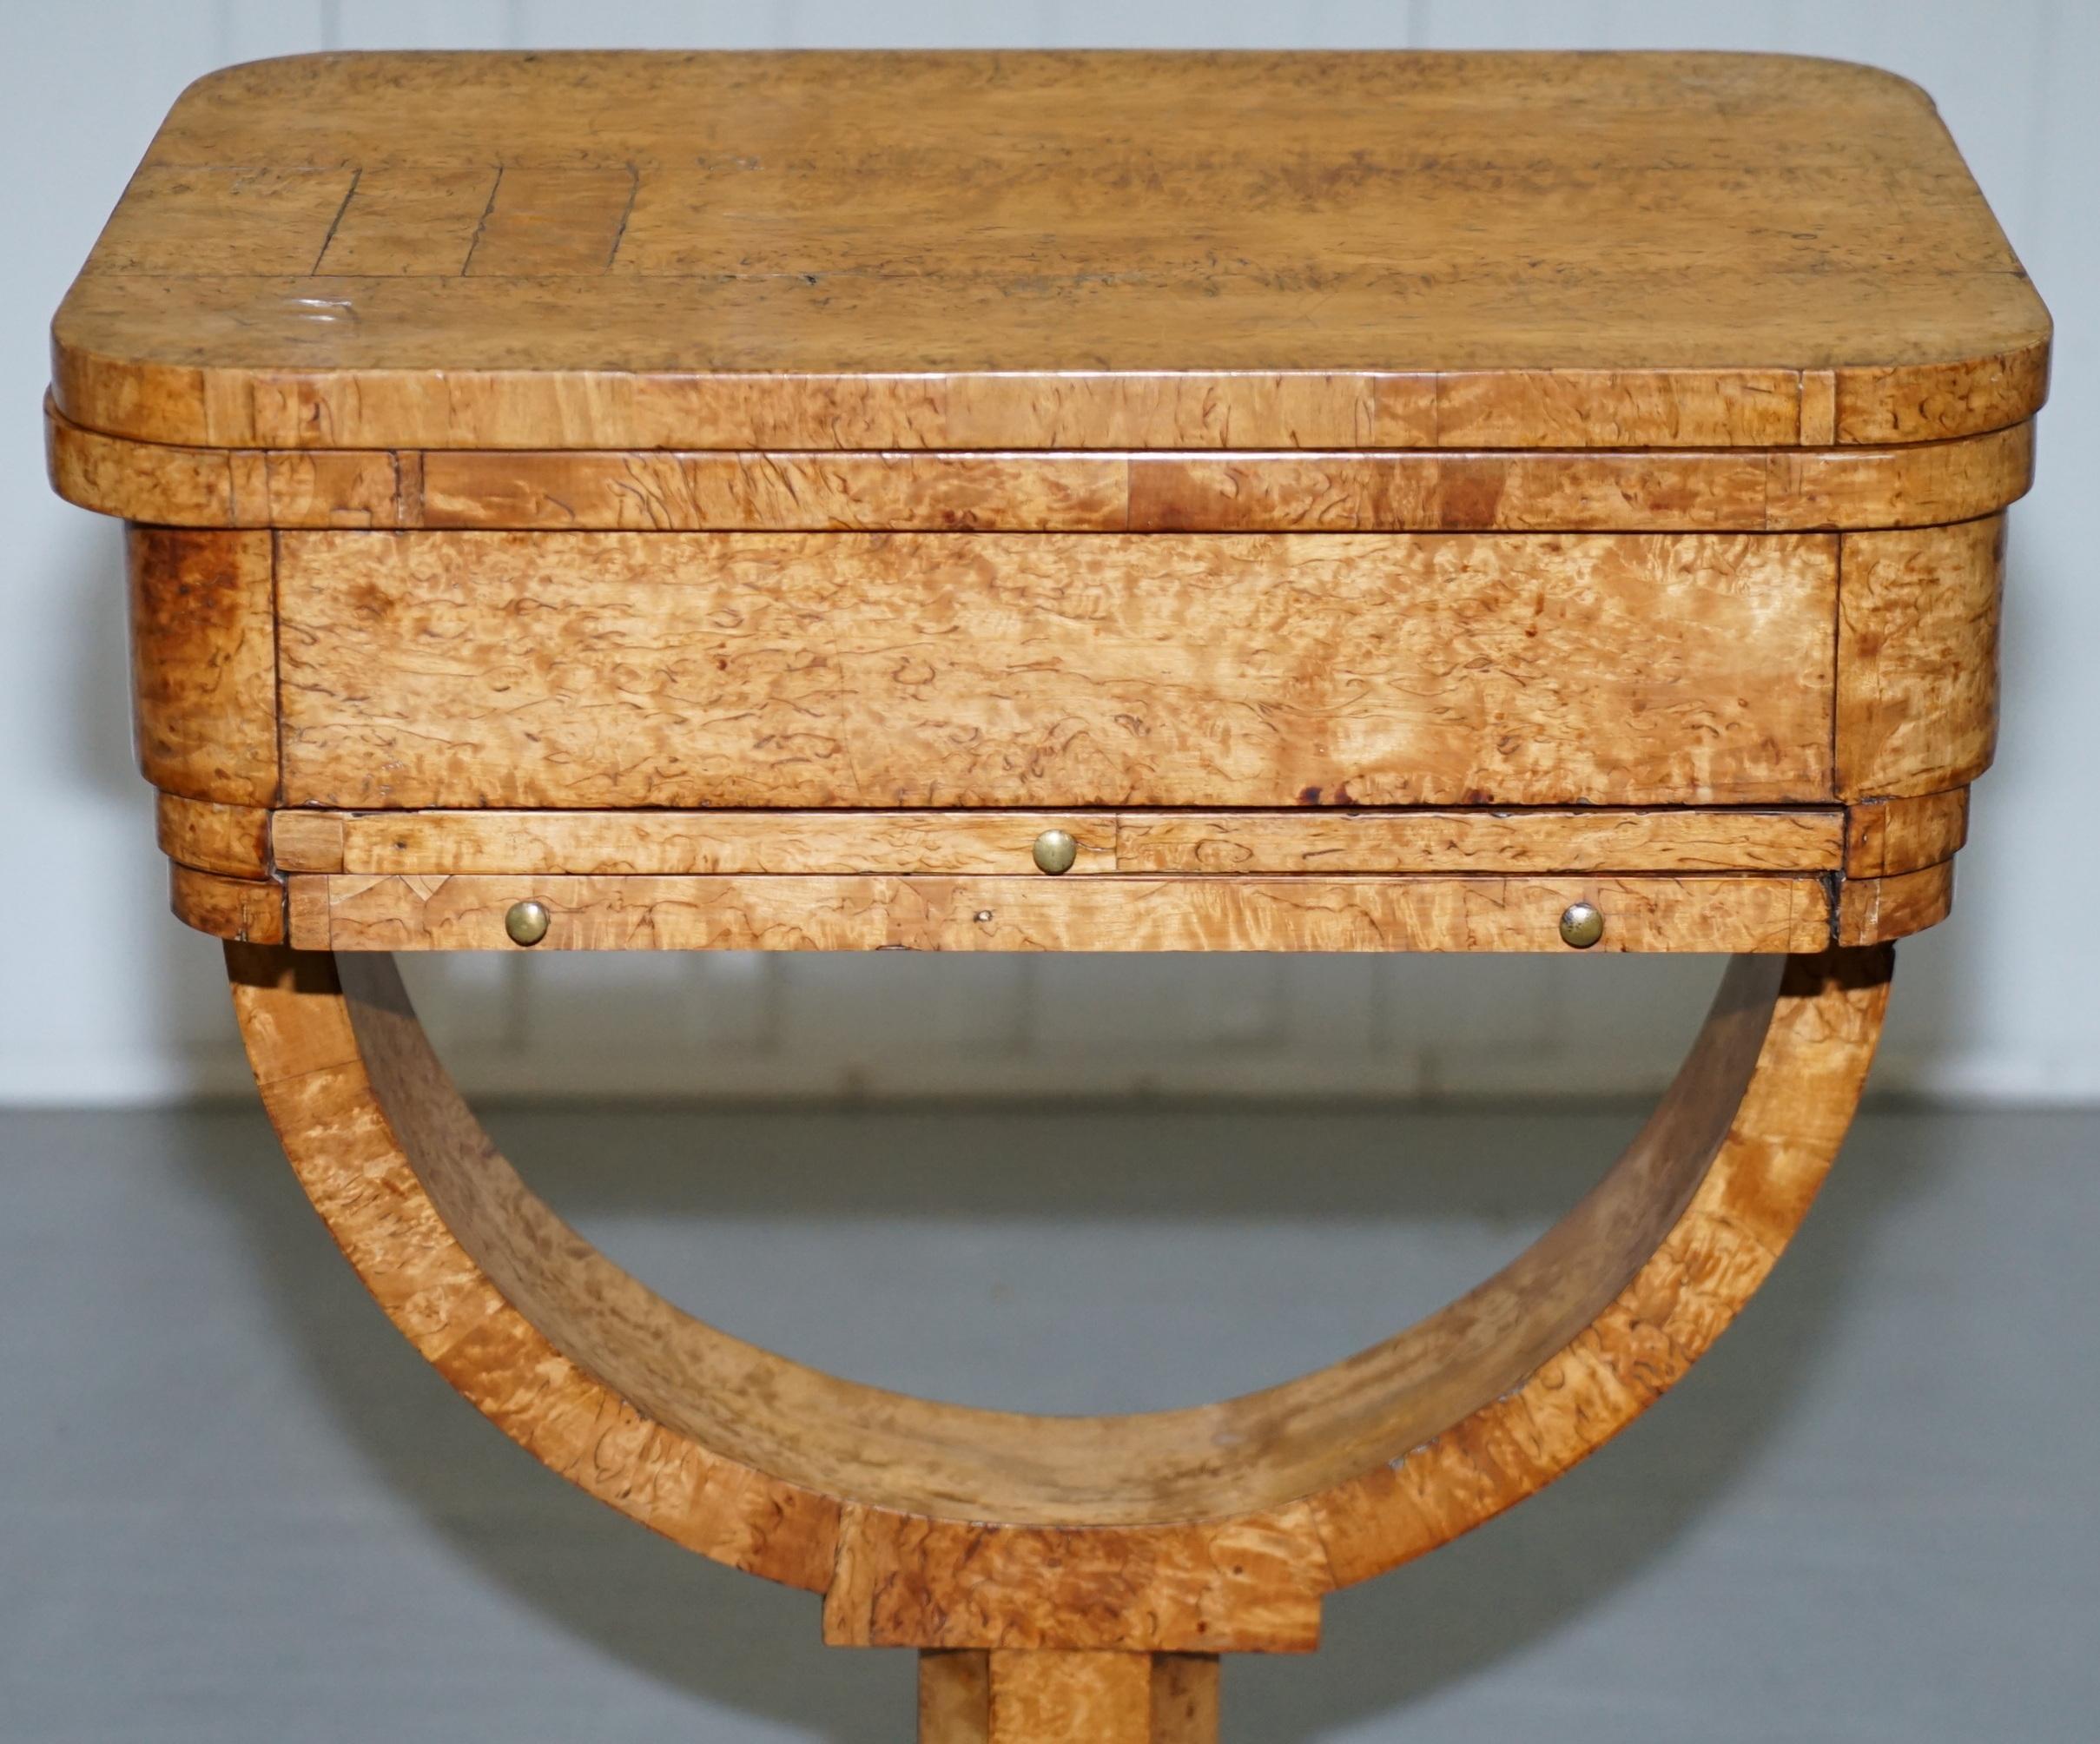 Mid-19th Century Rare Biedermeier Burr Satinwood Victorian Games Table for Chess Cards Fold Out